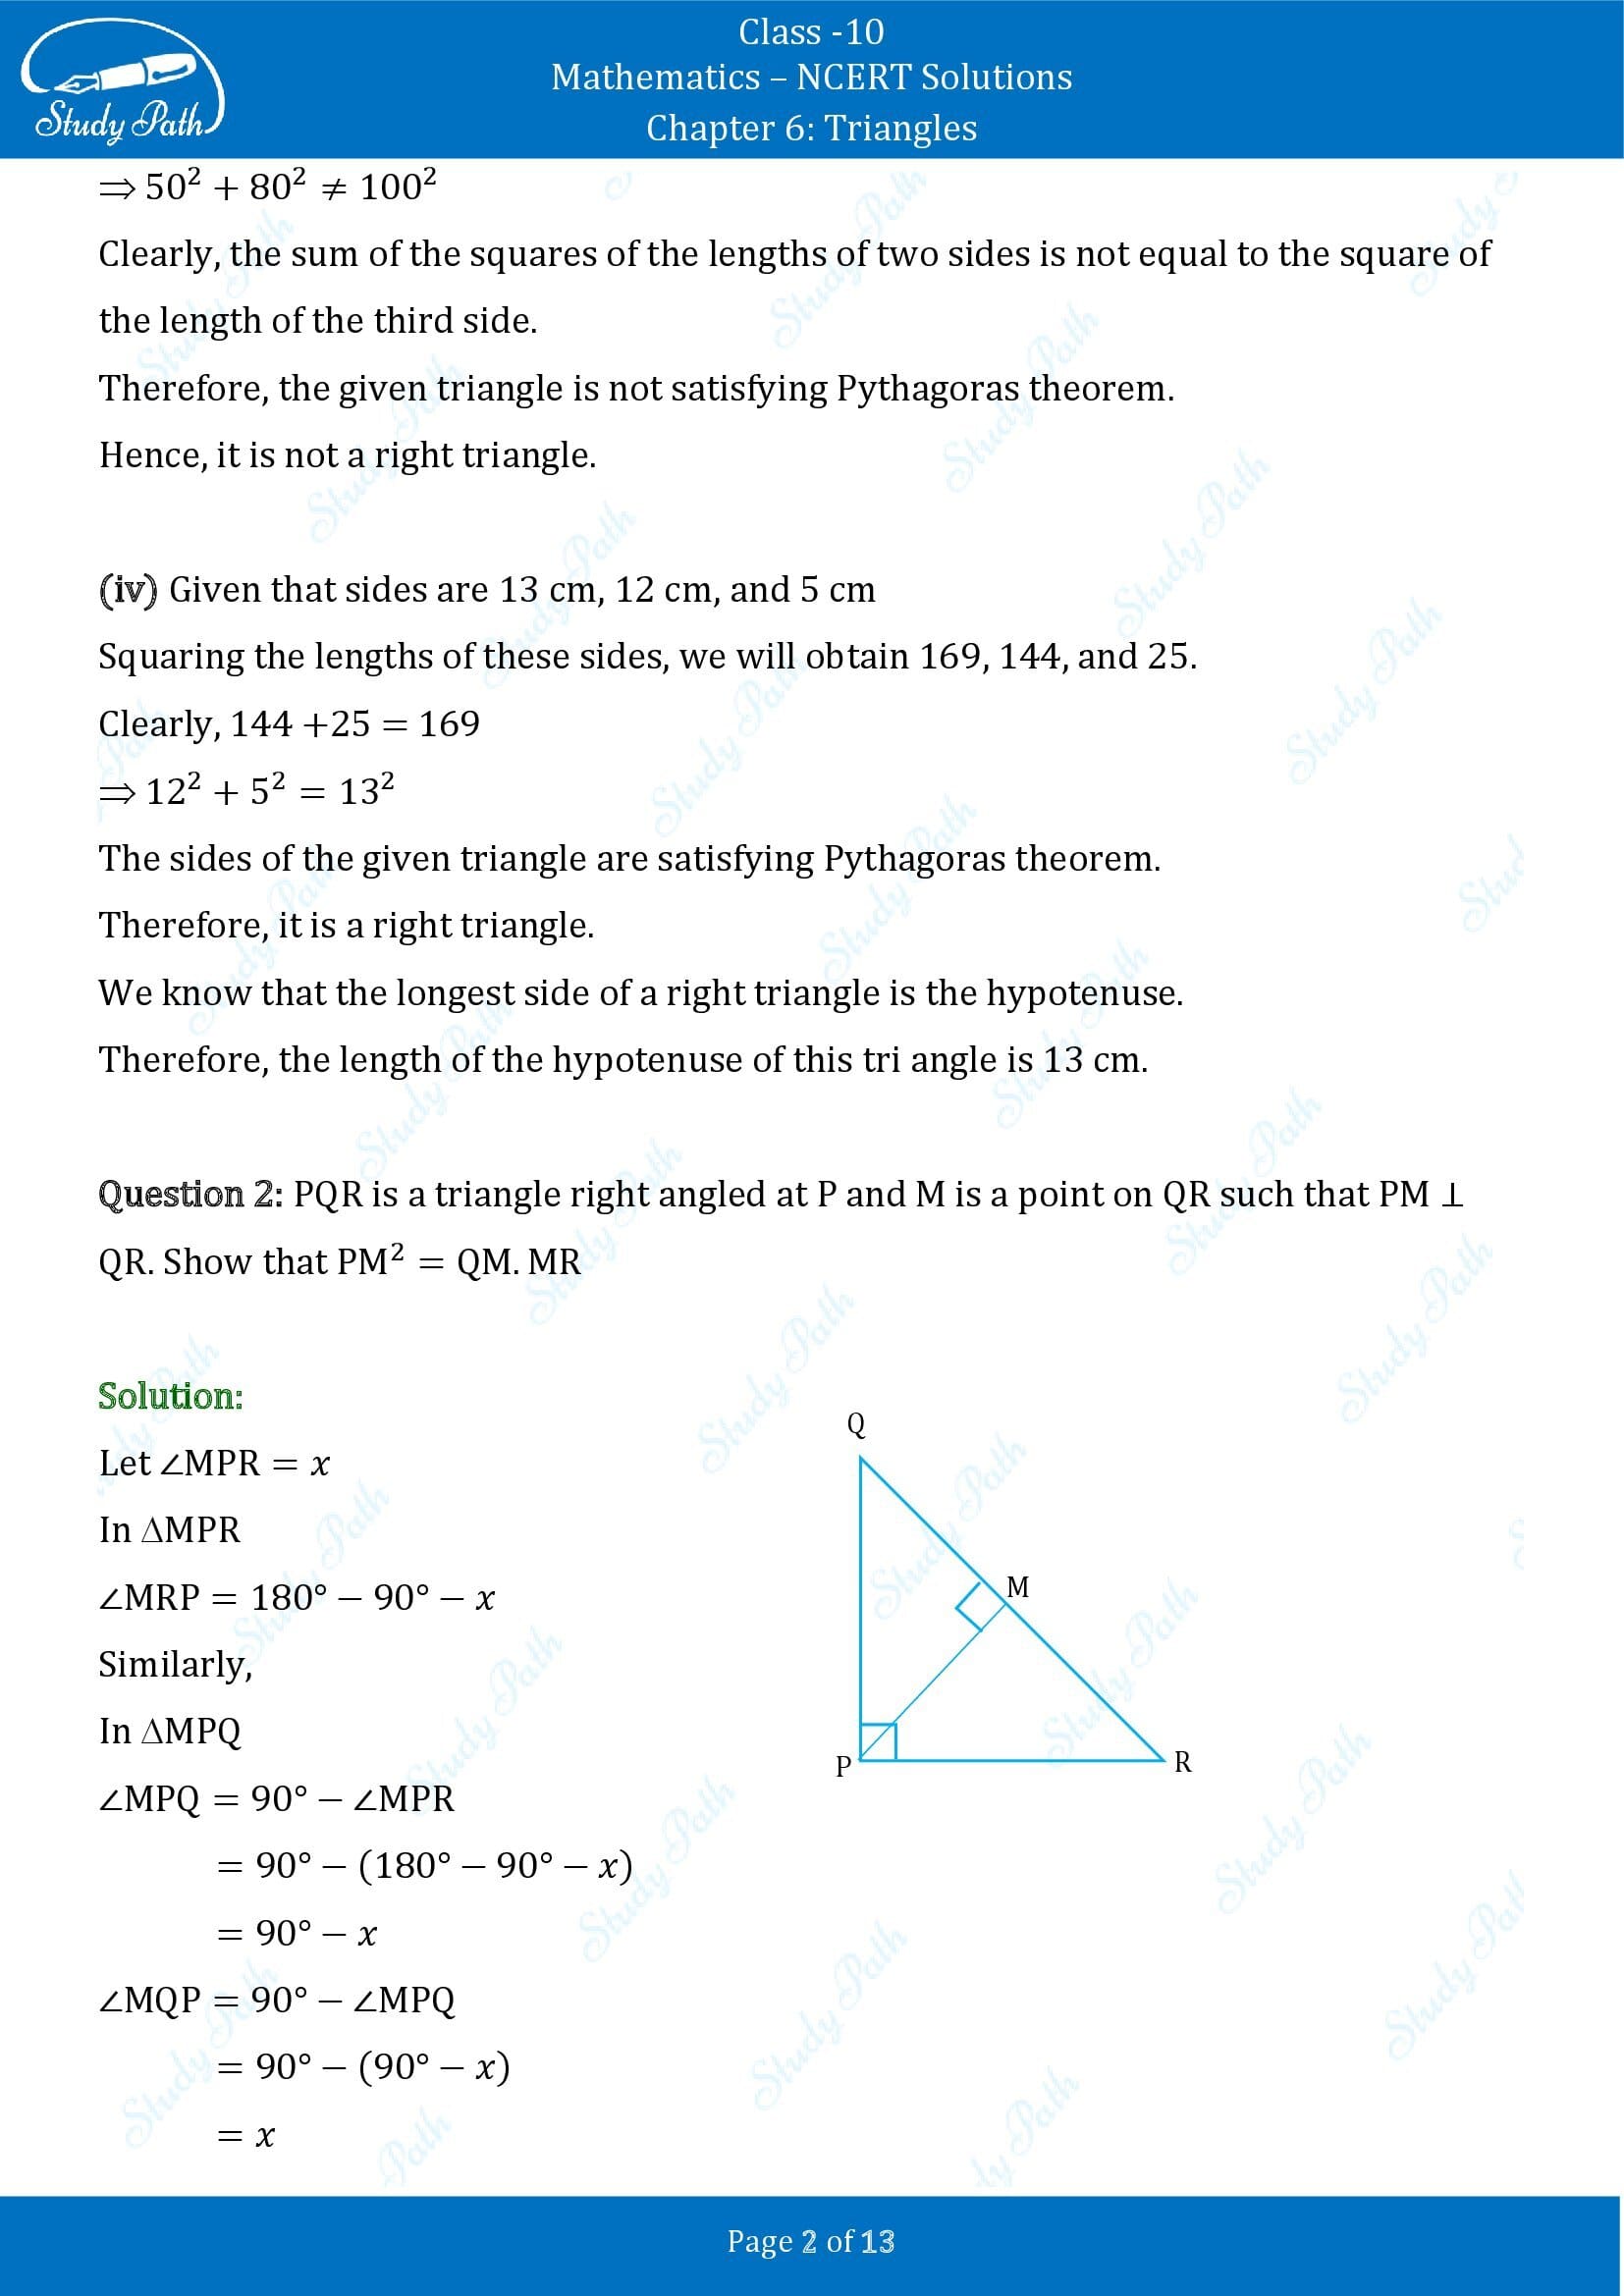 NCERT Solutions for Class 10 Maths Chapter 6 Triangles Exercise 6.5 00002